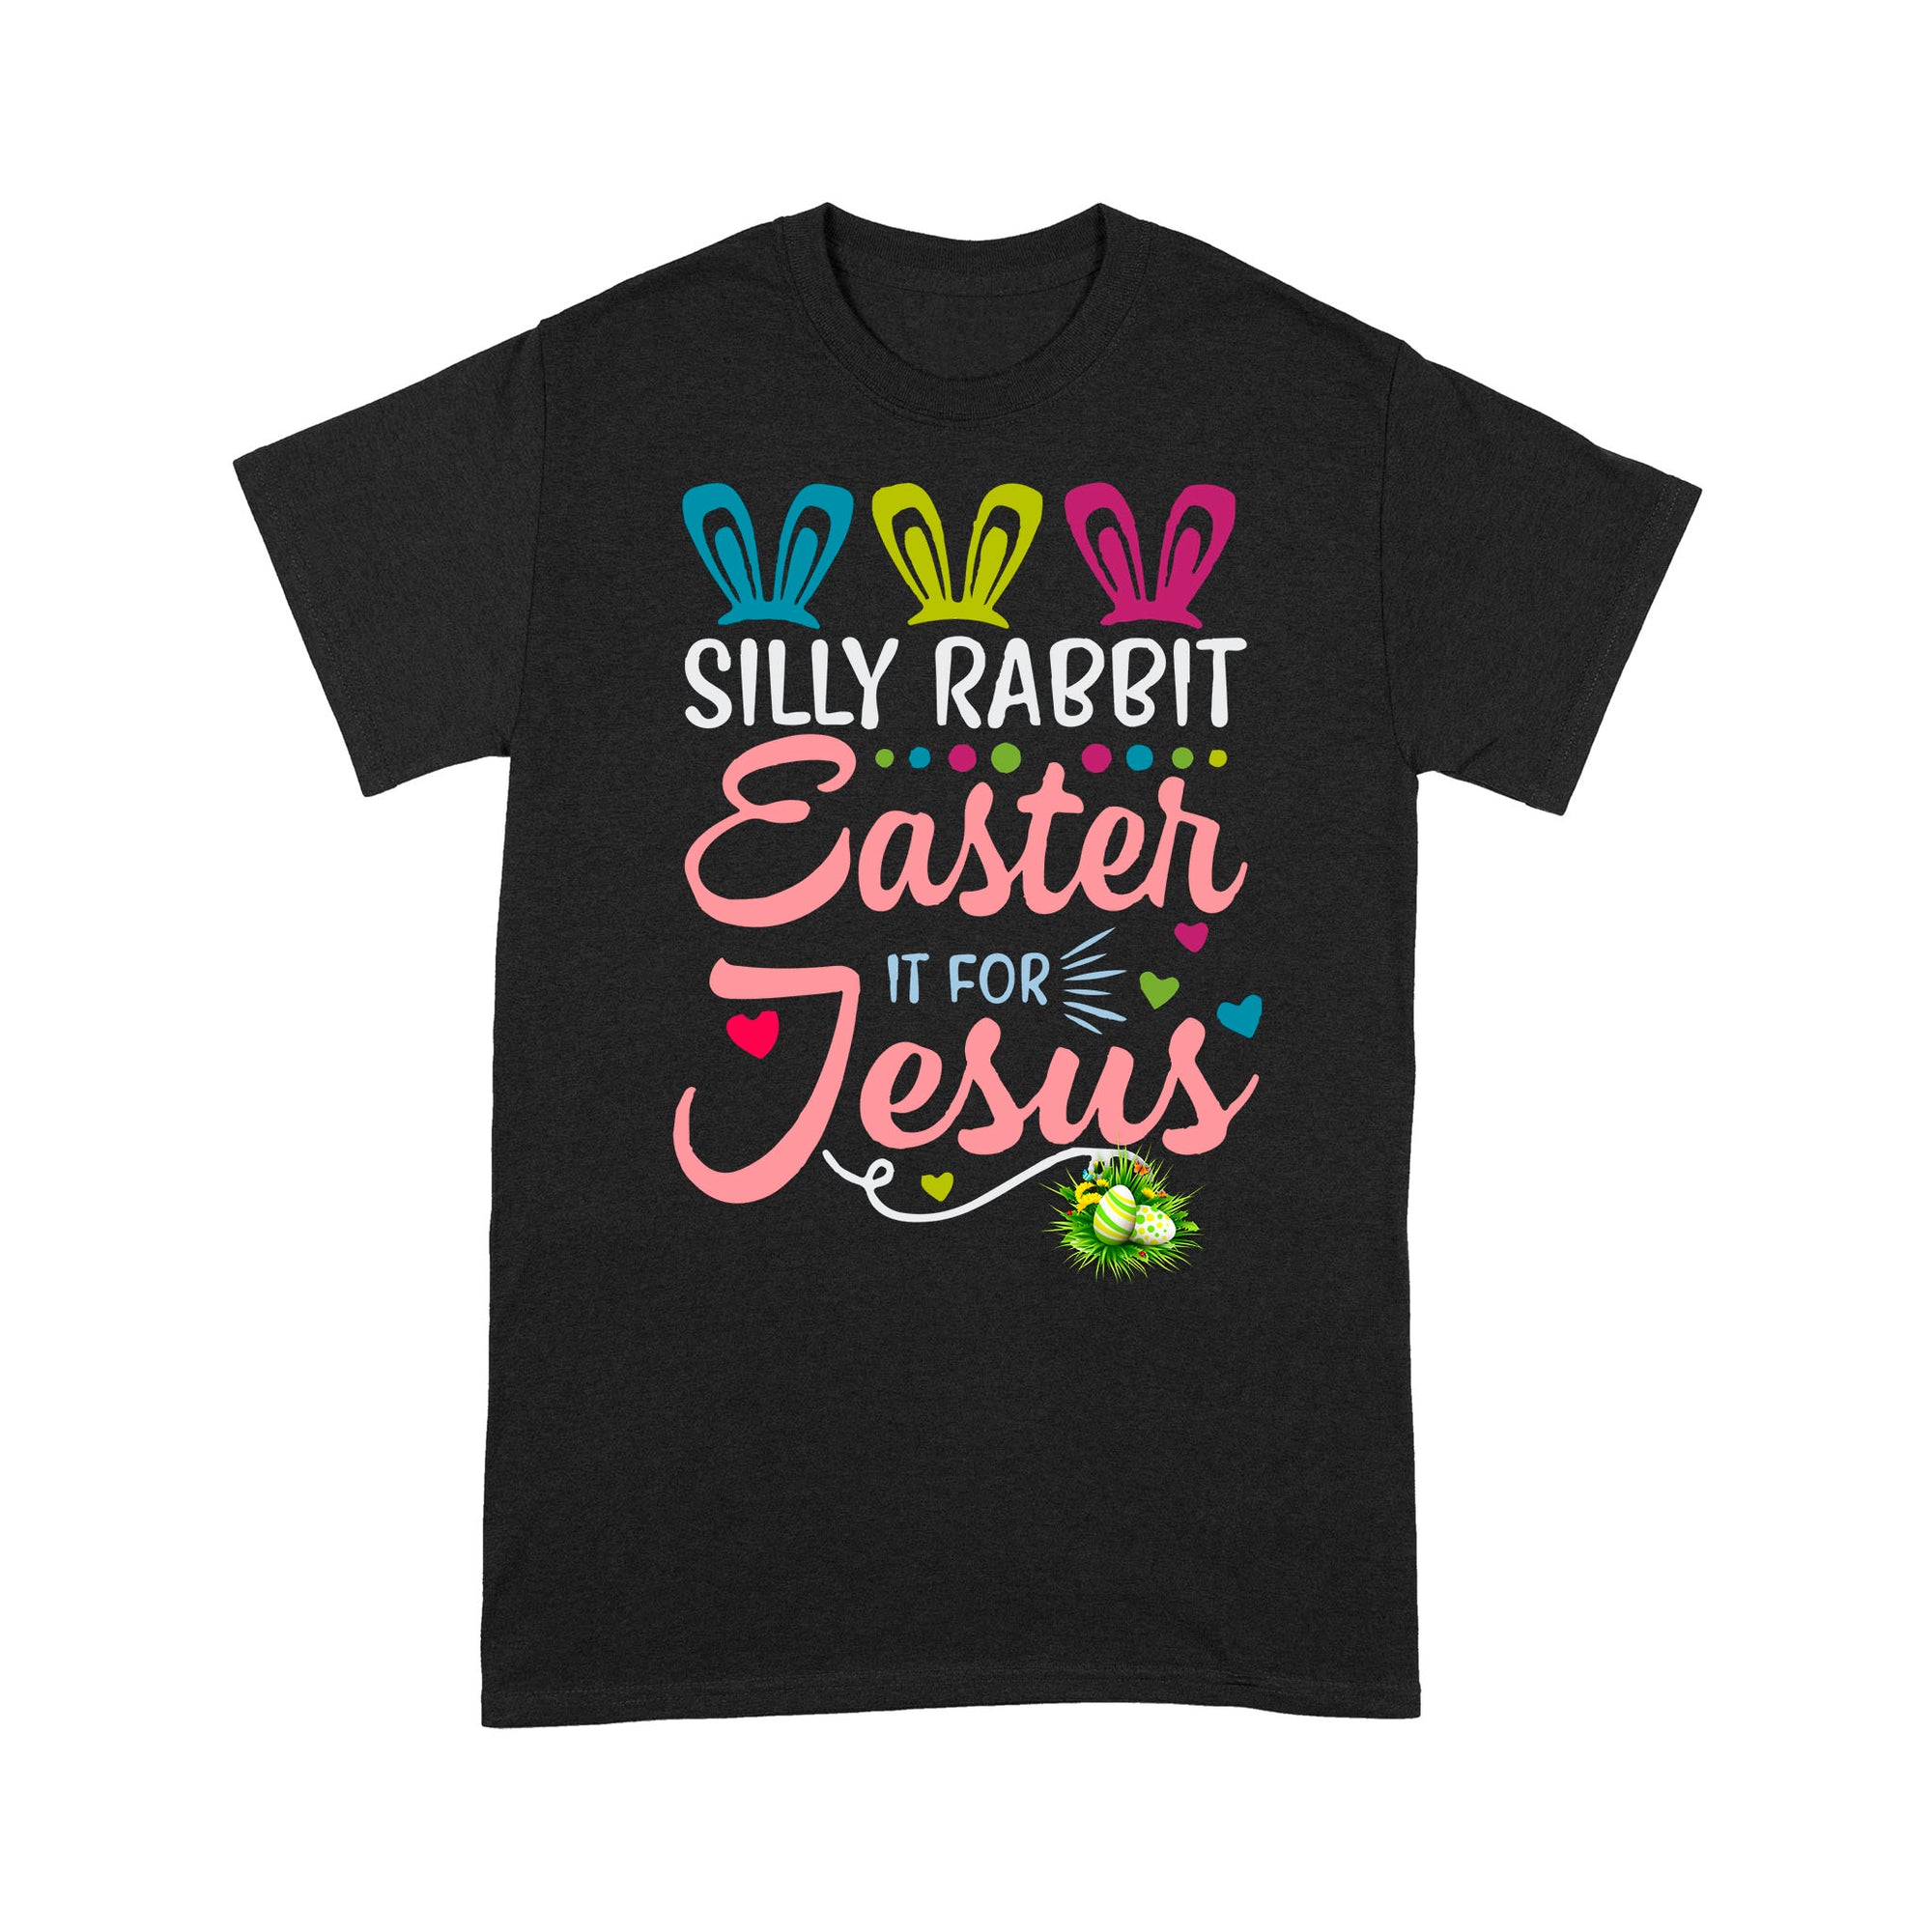 Premium T-shirt - Silly Rabbit Easter Is For Jesus Christians Cross Bunny Easter Eggs Cute